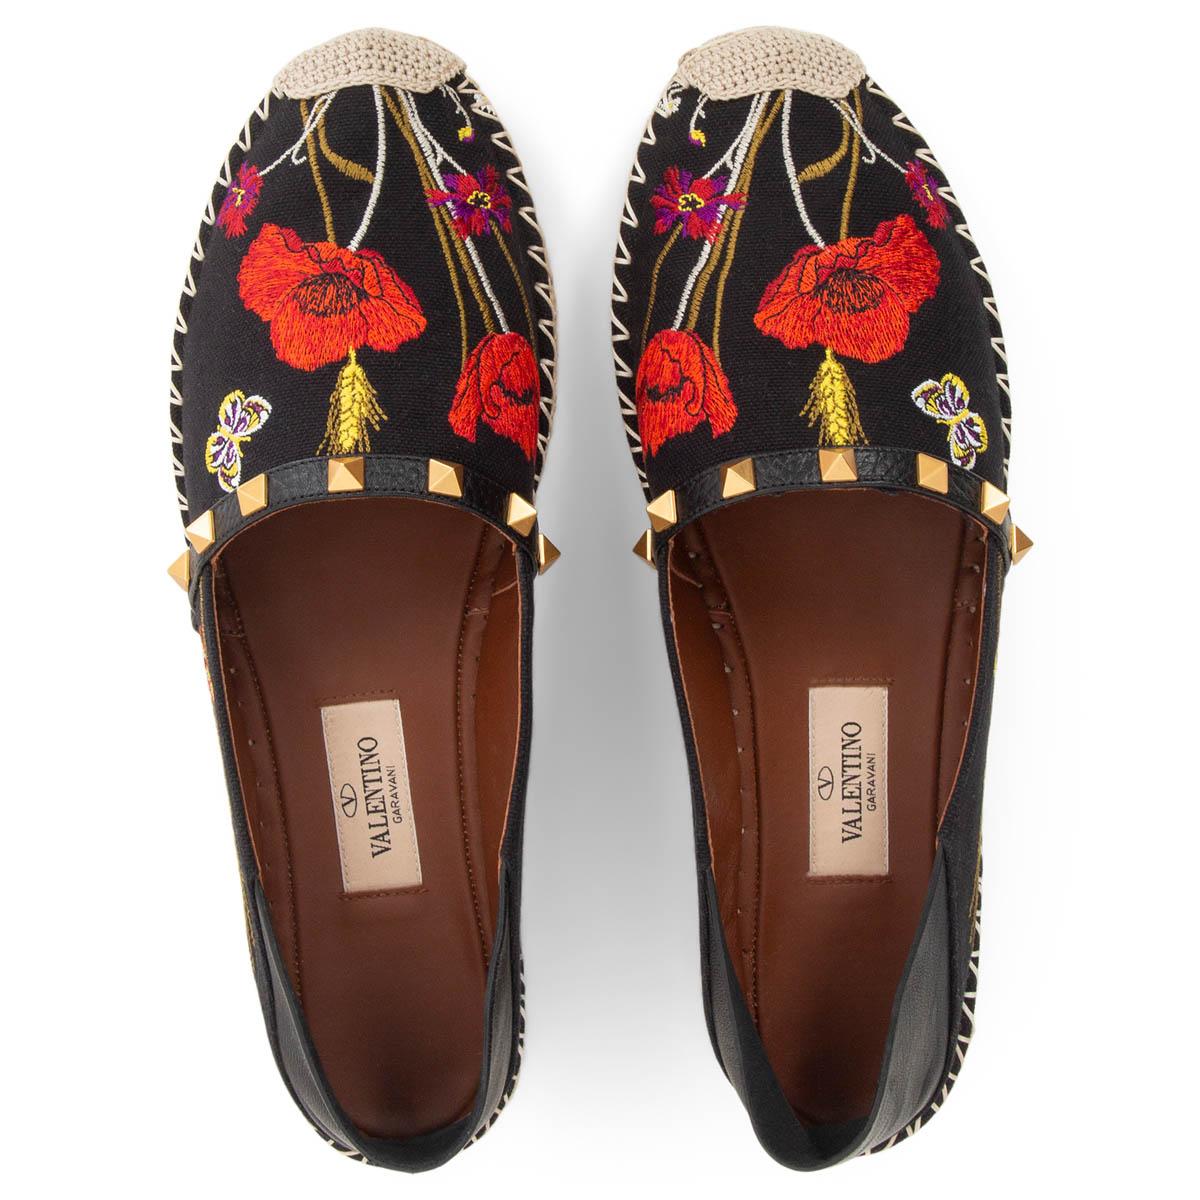 Women's VALENTINO black canvas FLORAL EMBROIDERED ROCKSTUD Espadrilles Shoes 40